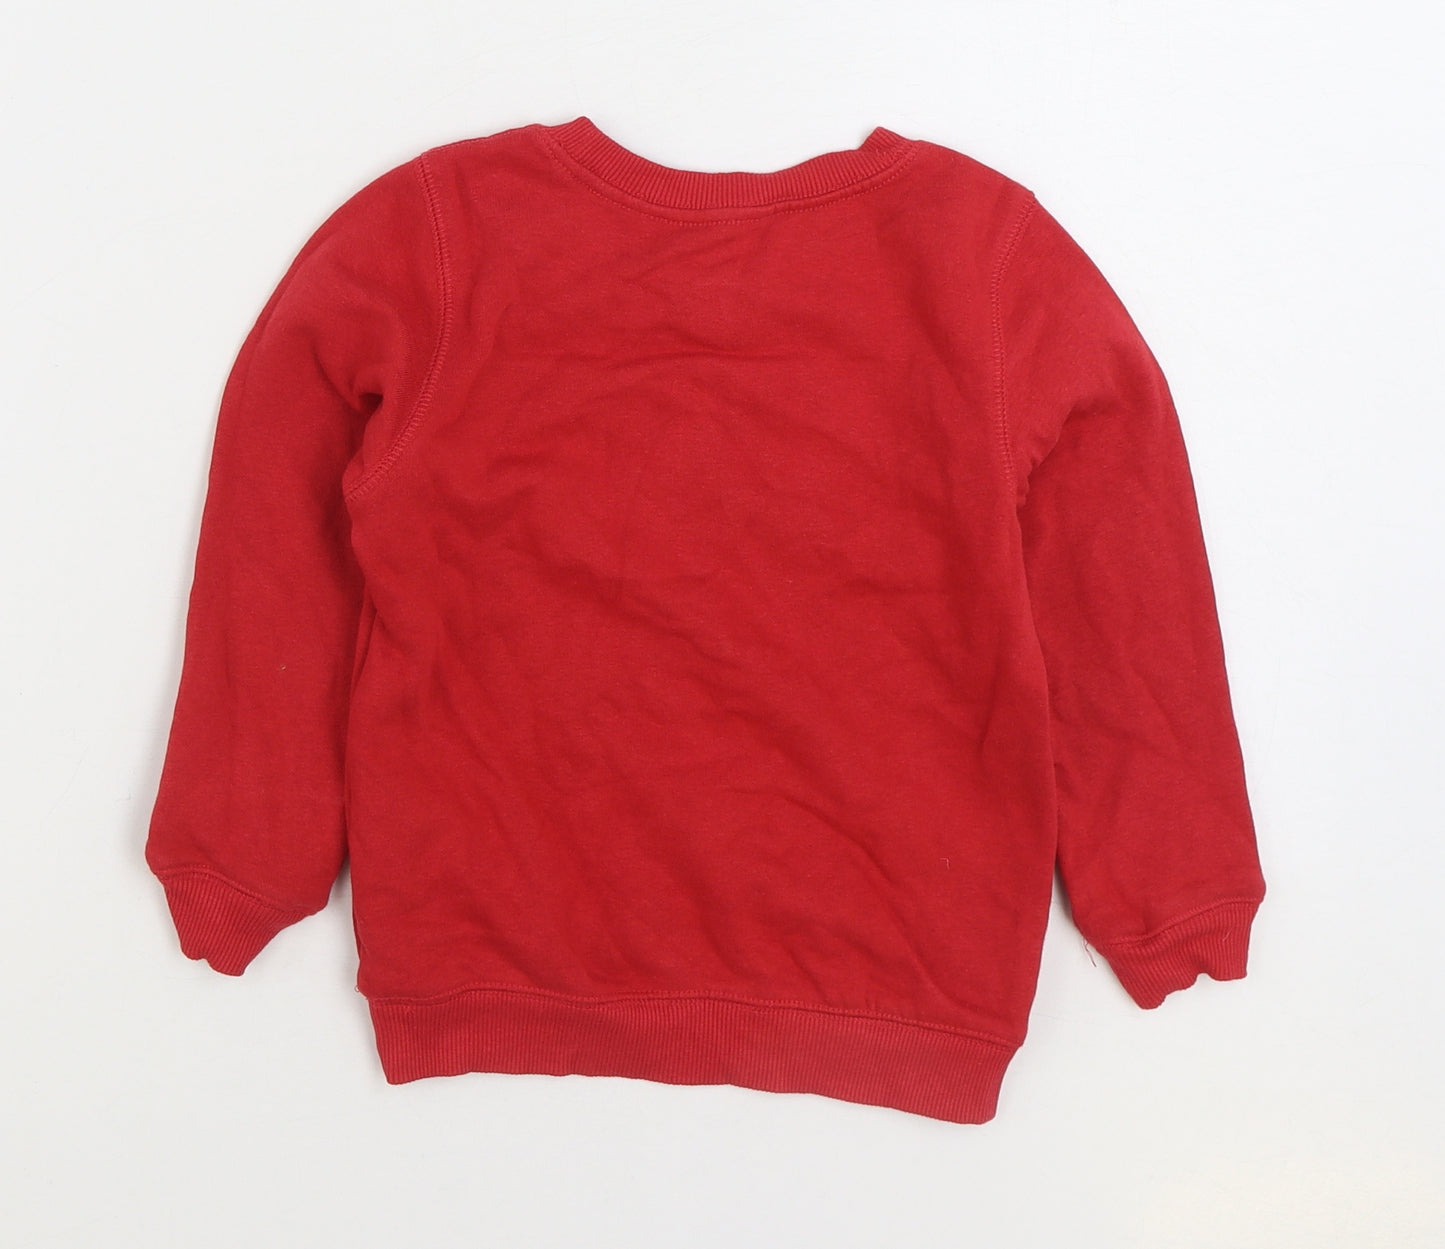 Lily & Dan Boys Red Cotton Pullover Sweatshirt Size 5-6 Years Pullover